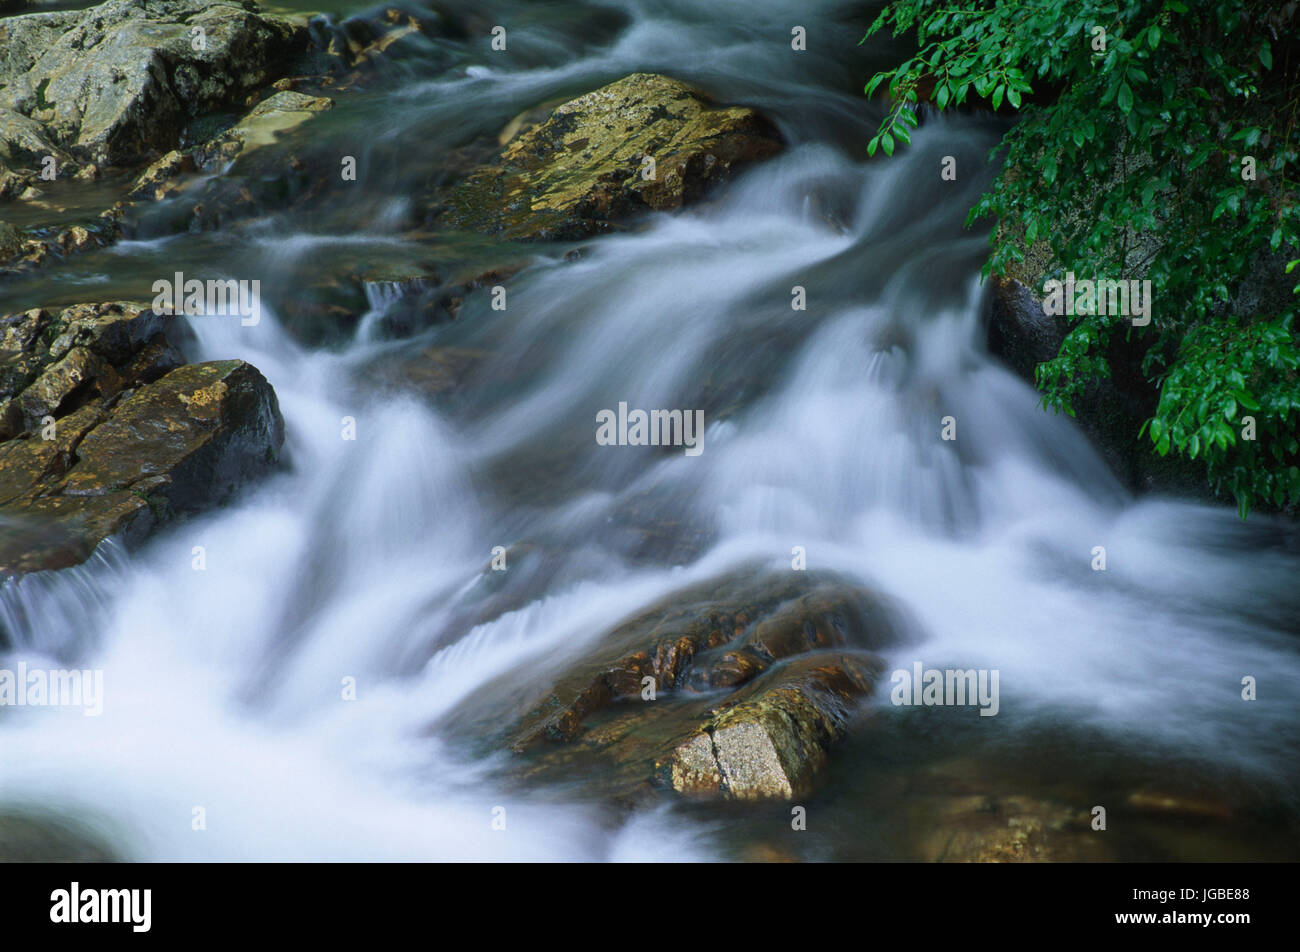 North Prong Little Pigeon River, Great Smoky Mountains National Park, North Carolina Stock Photo